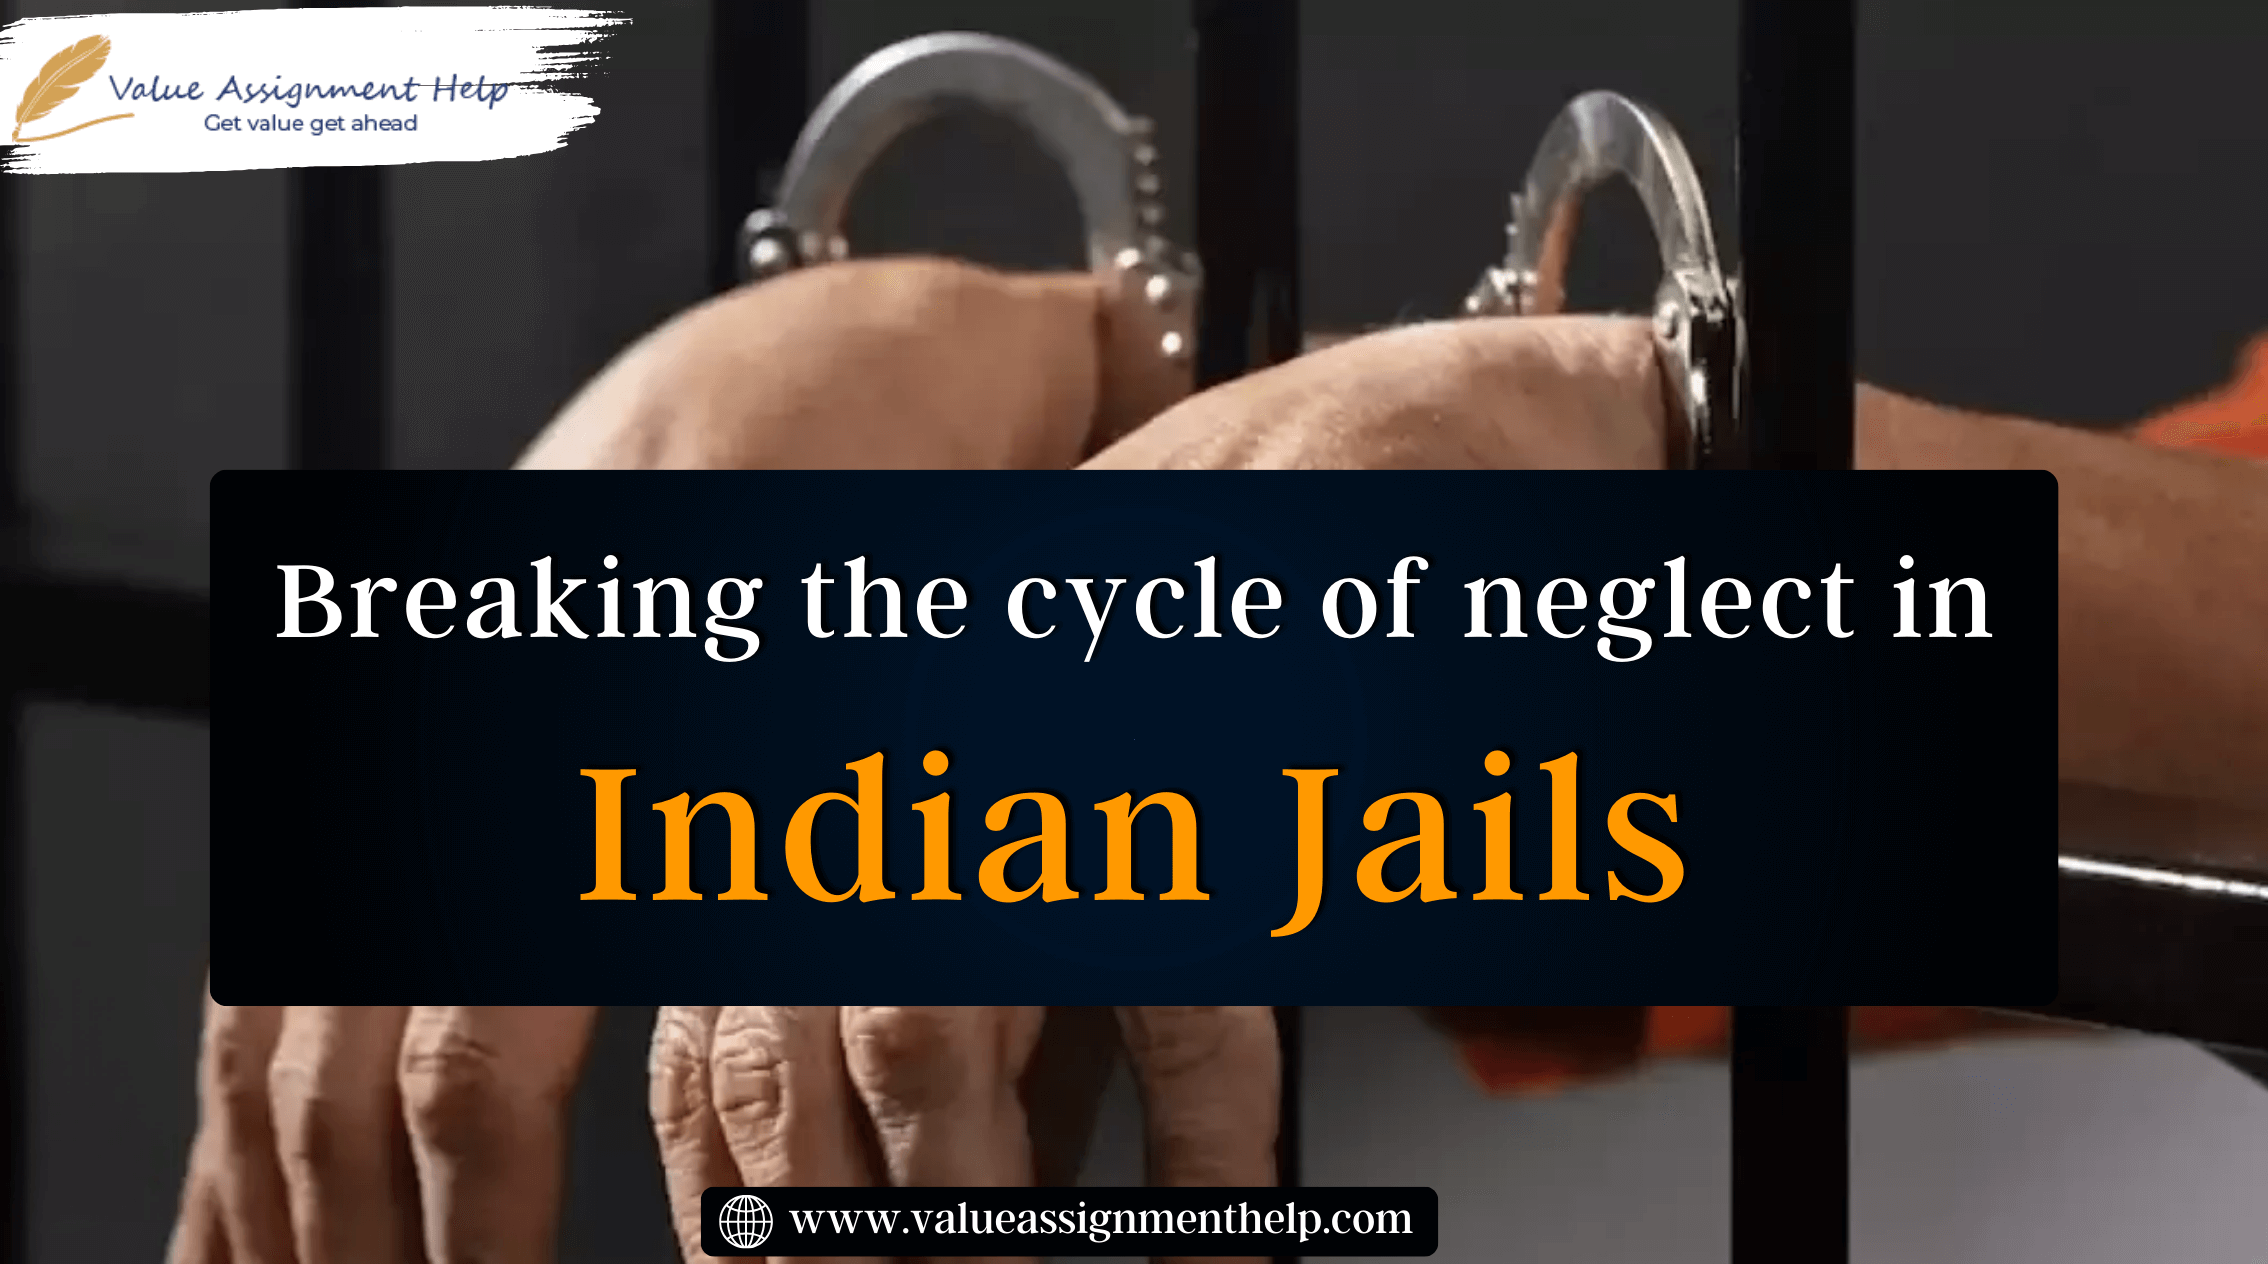  Breaking the Cycle of Neglect in Indian Jails